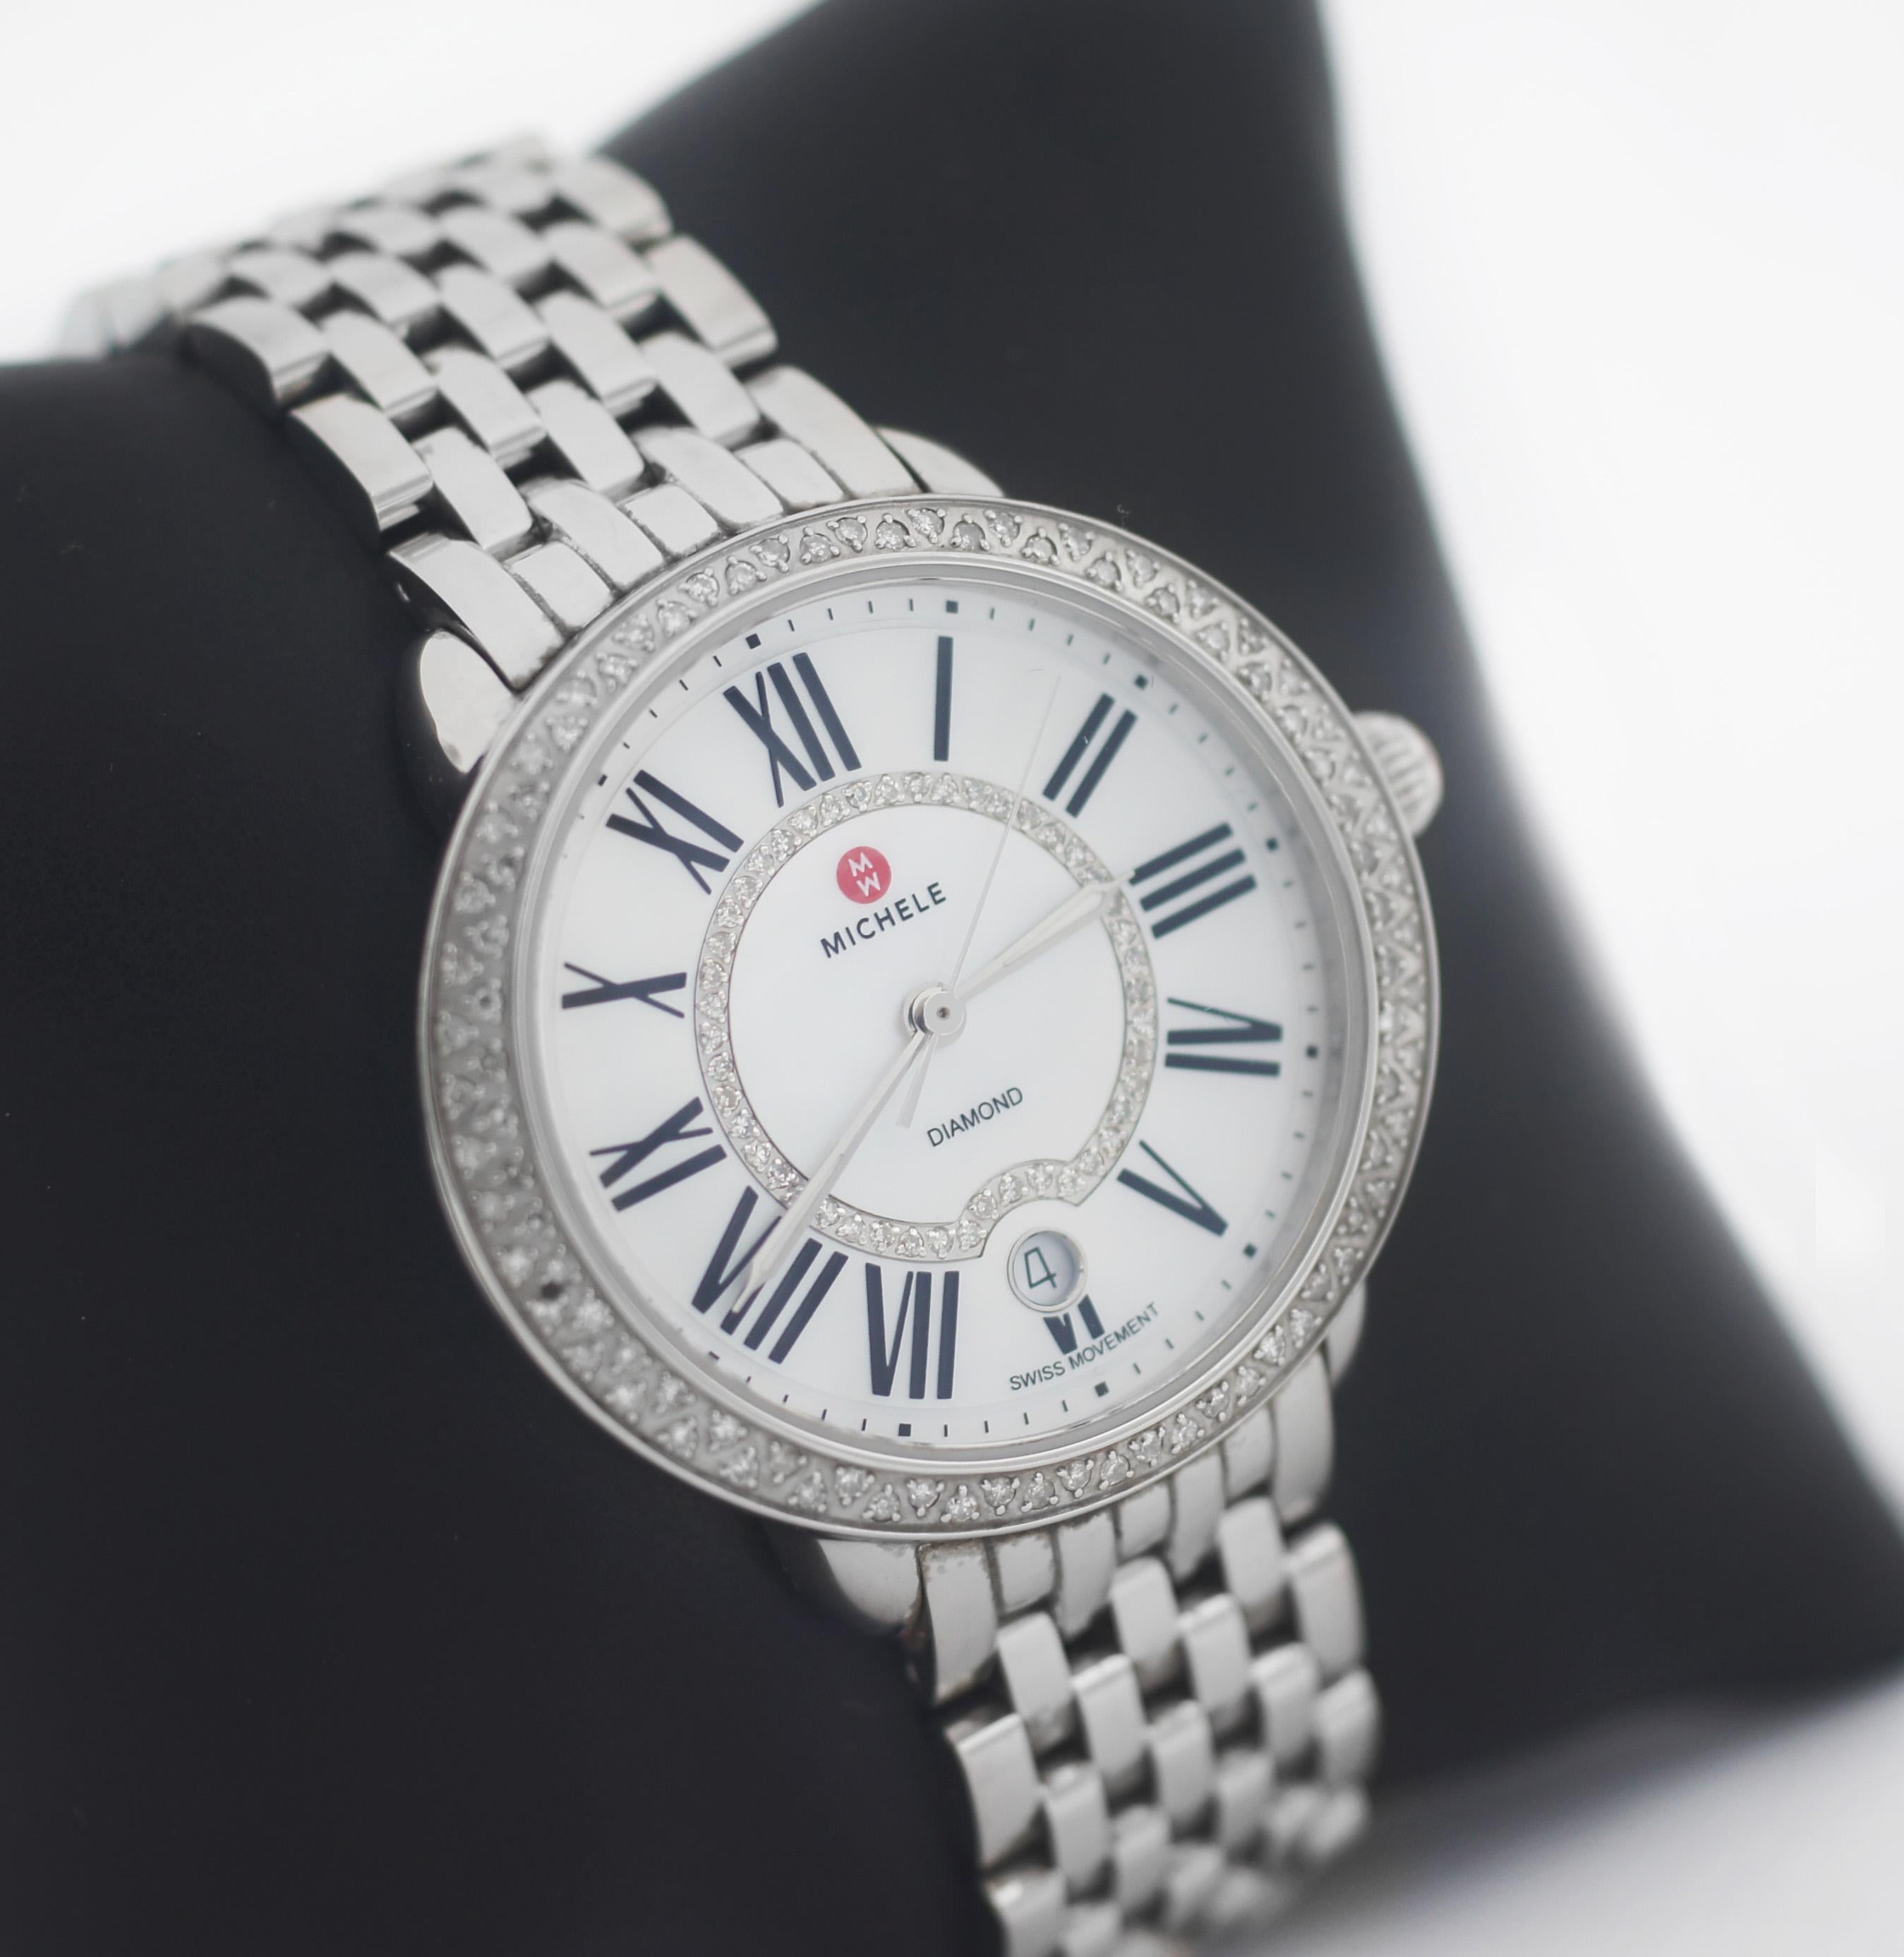 Michele
MW21B01A1963
Date window
Series: Serein
Movement: Swiss made Quartz
Stainless Steel case
Case approx. 36mm
Dial Color: Mother of Pearl / White with black roman numerals and single row diamonds
Date window at 6 o'clock
Round Diamond